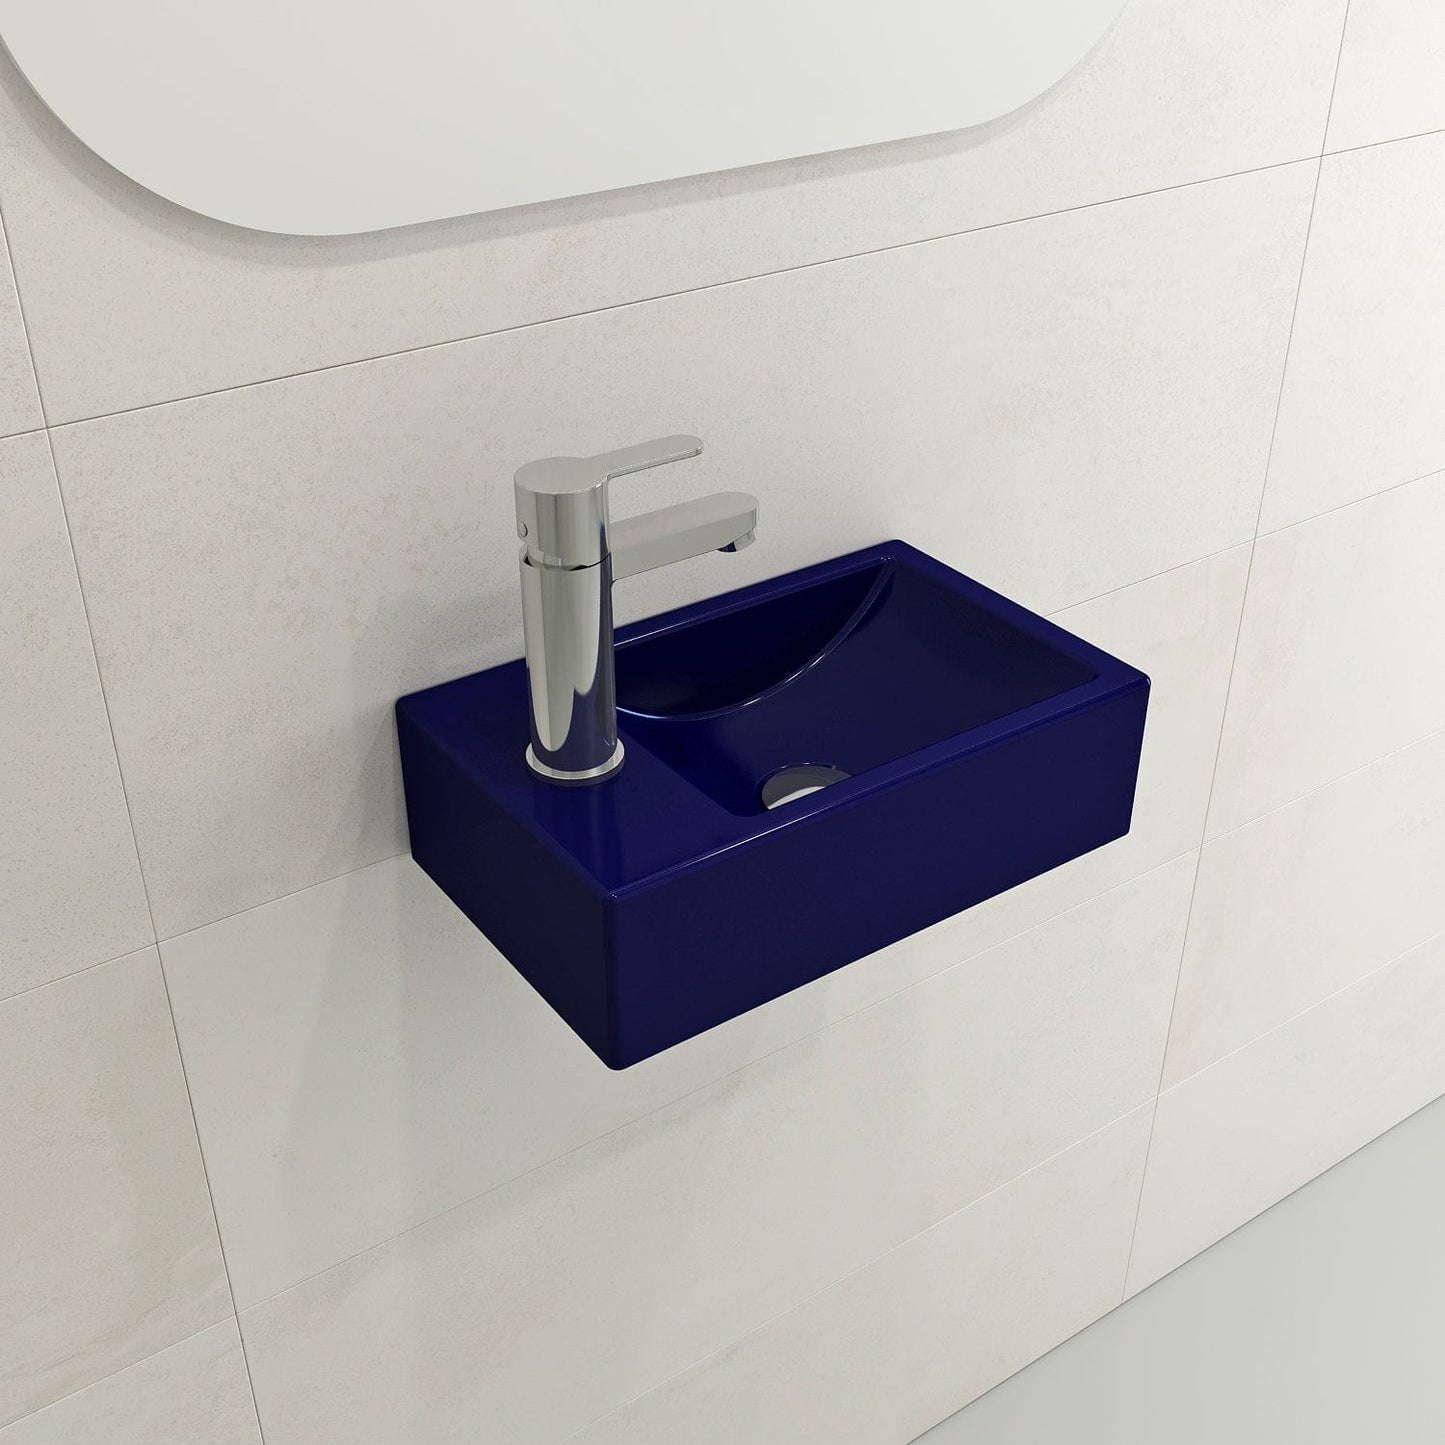 BOCCHI MILANO 14.5" Wall-Mounted Sink Fireclay 1-hole Left Side Faucet Deck With Overflow